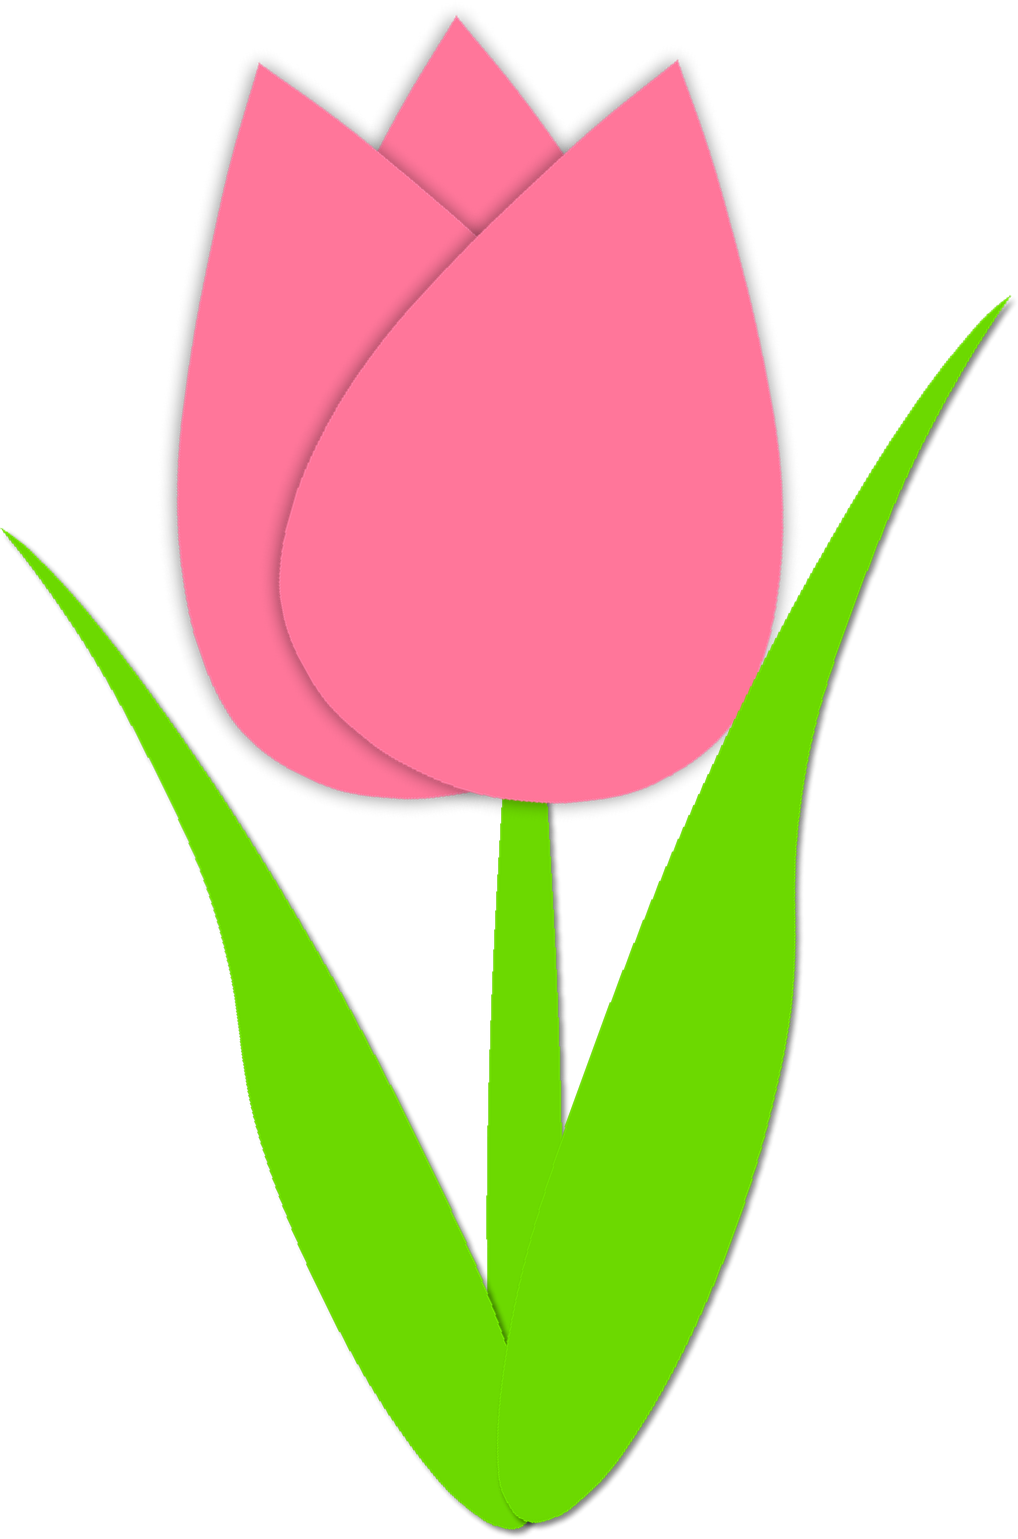 Pink and Yellow Tulip Clip Art – Clipart Free Download